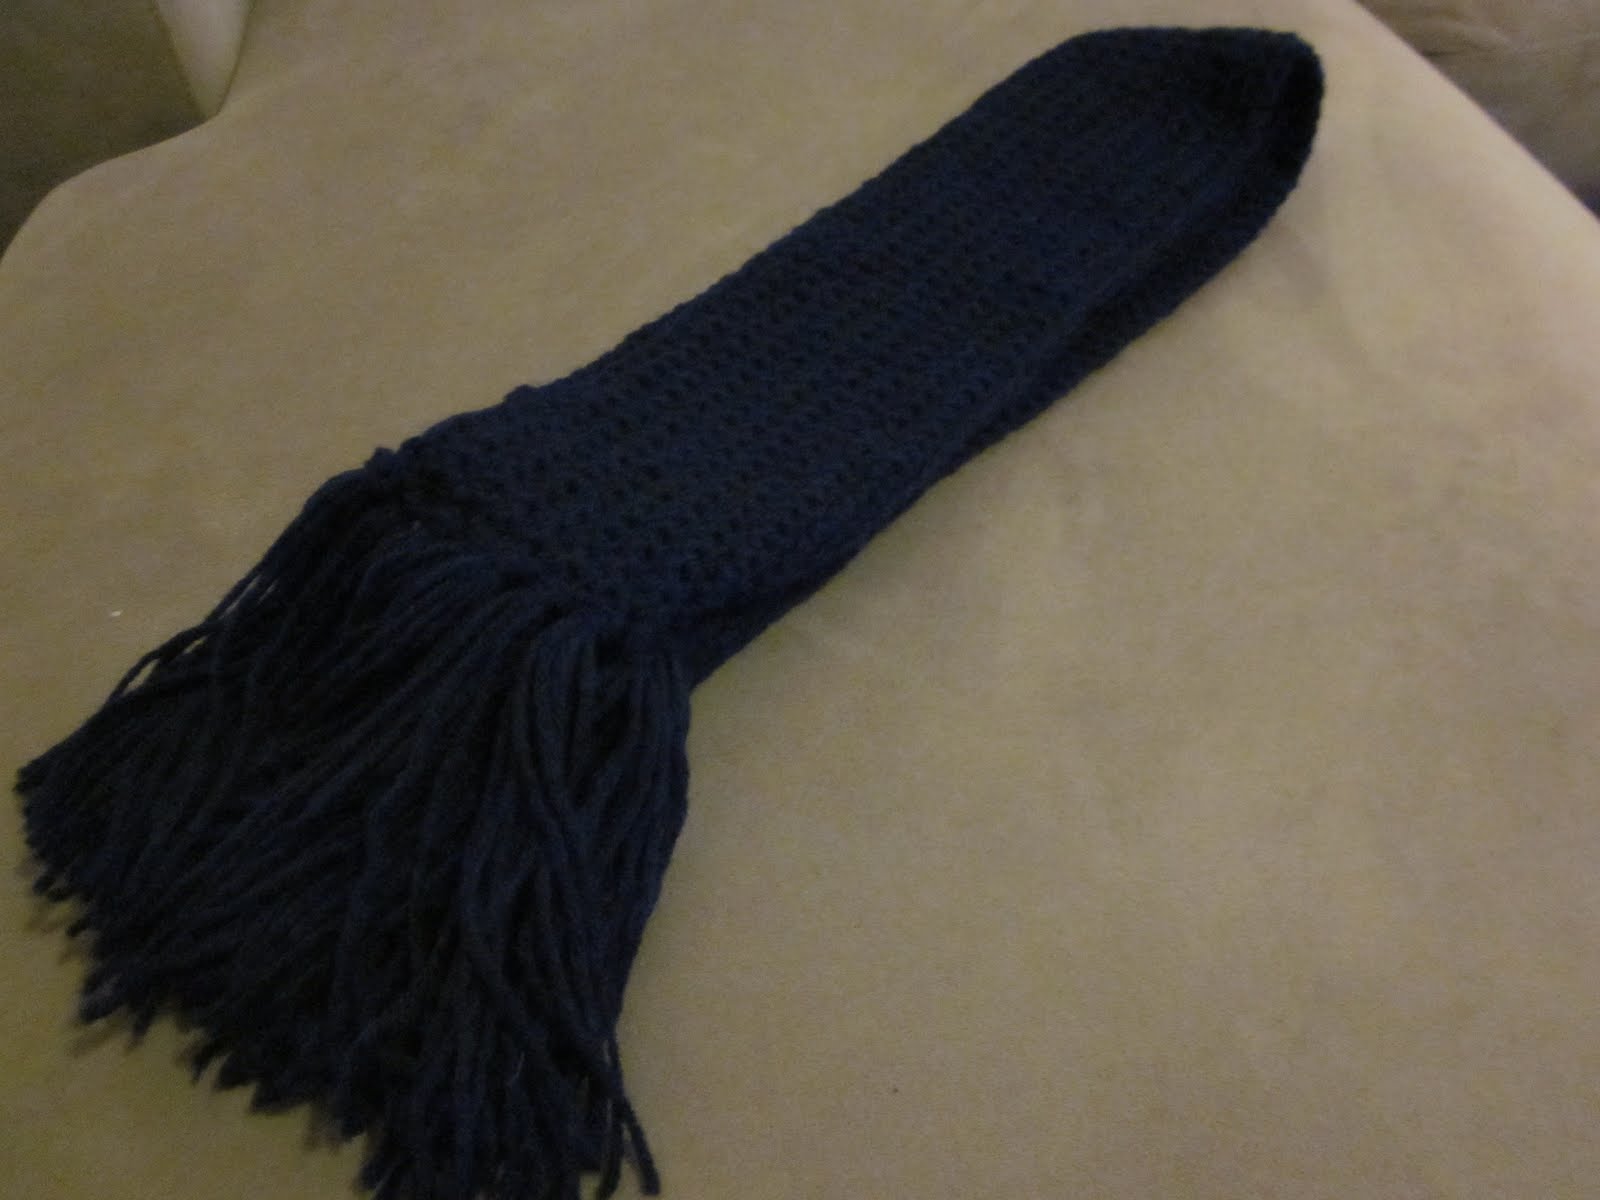 The Crafty Novice: How to: Add Fringe to a Scarf